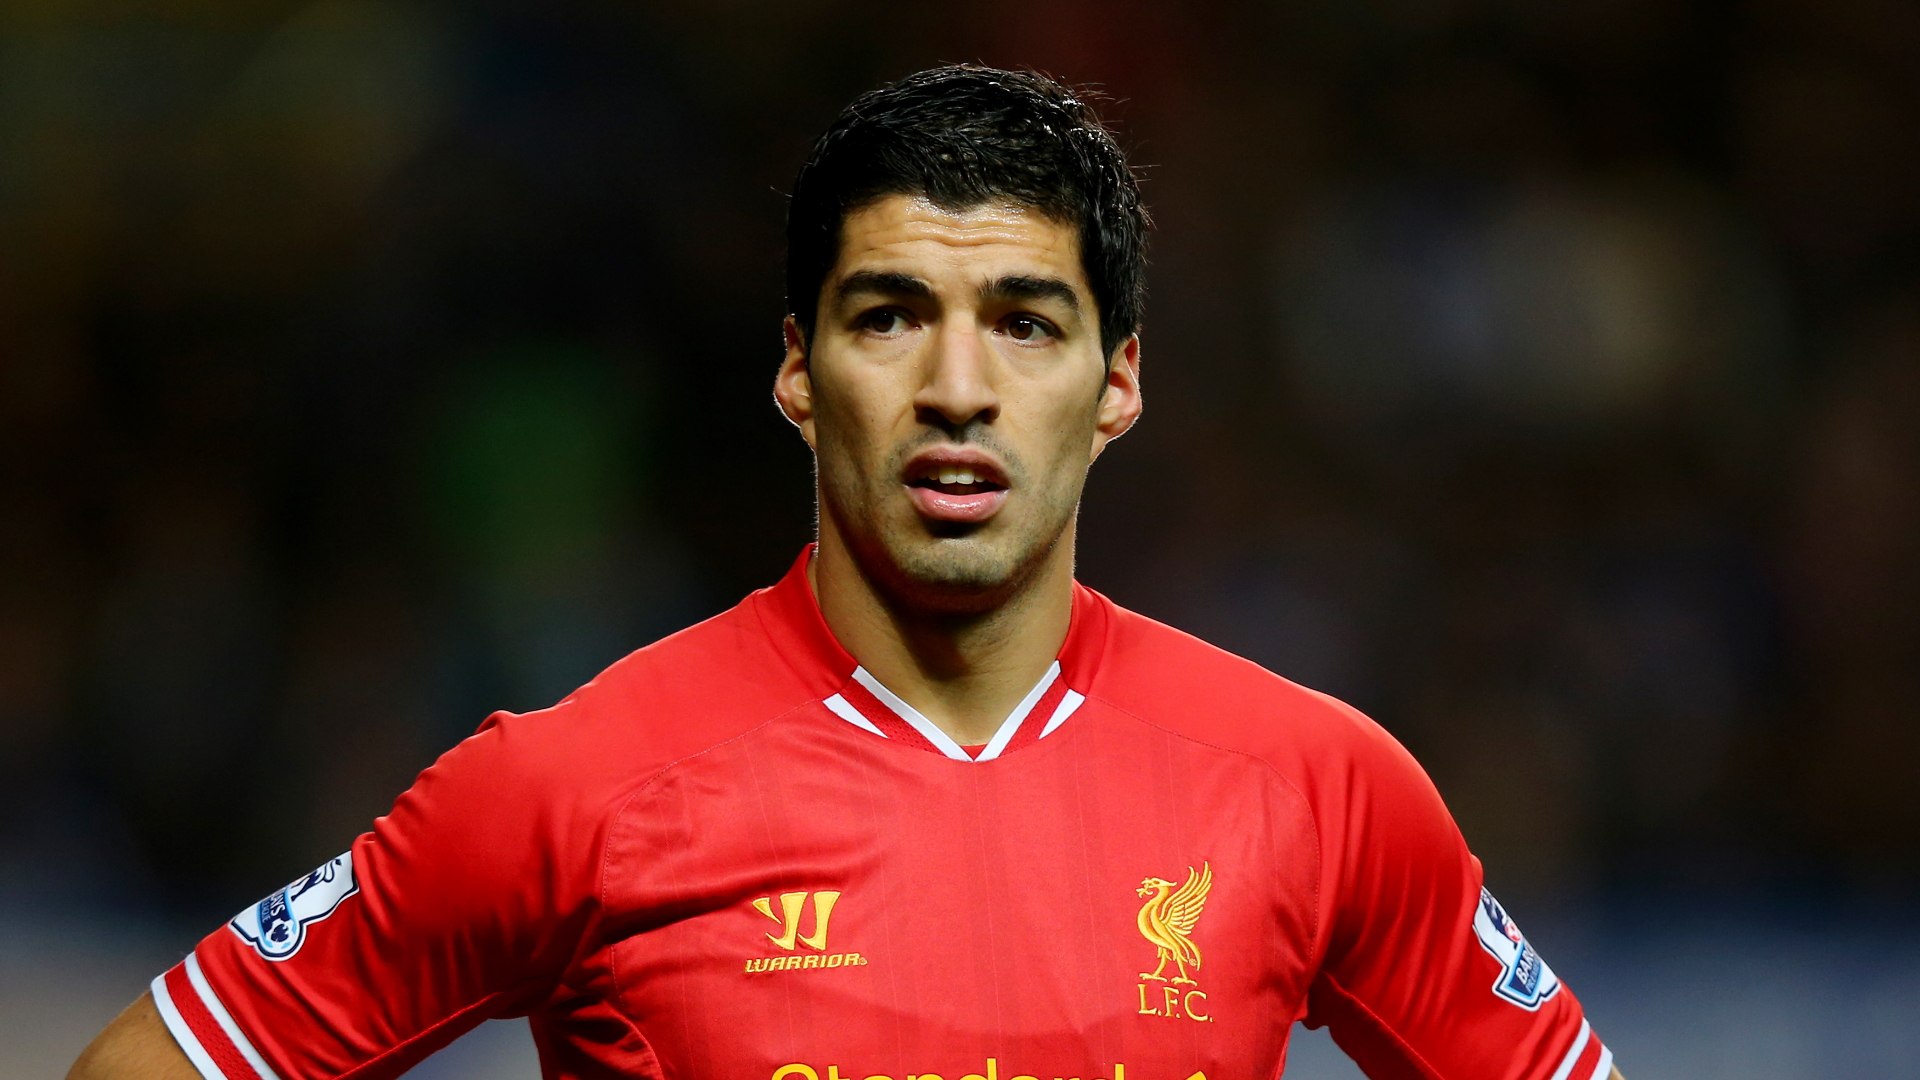 'They made that ridiculous bid' - Arsenal's failed move for Suarez still hurts Wright